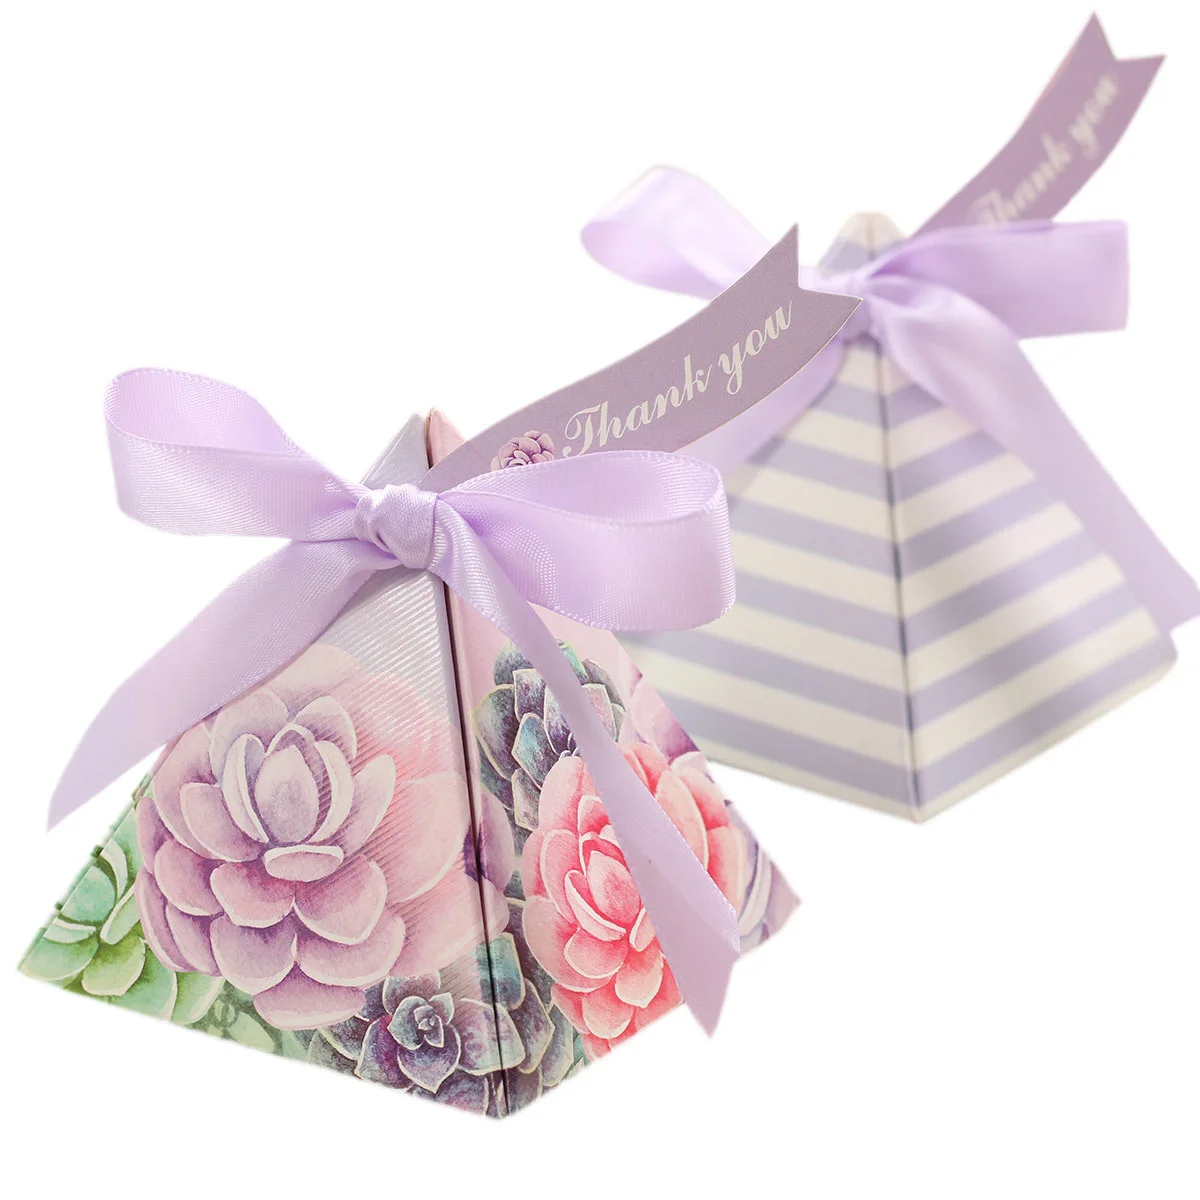 25 Pcs Valentine Favor Boxes Triangle Candy Baby Gifts Treat Wedding Accessories Bridal Shower Cookie